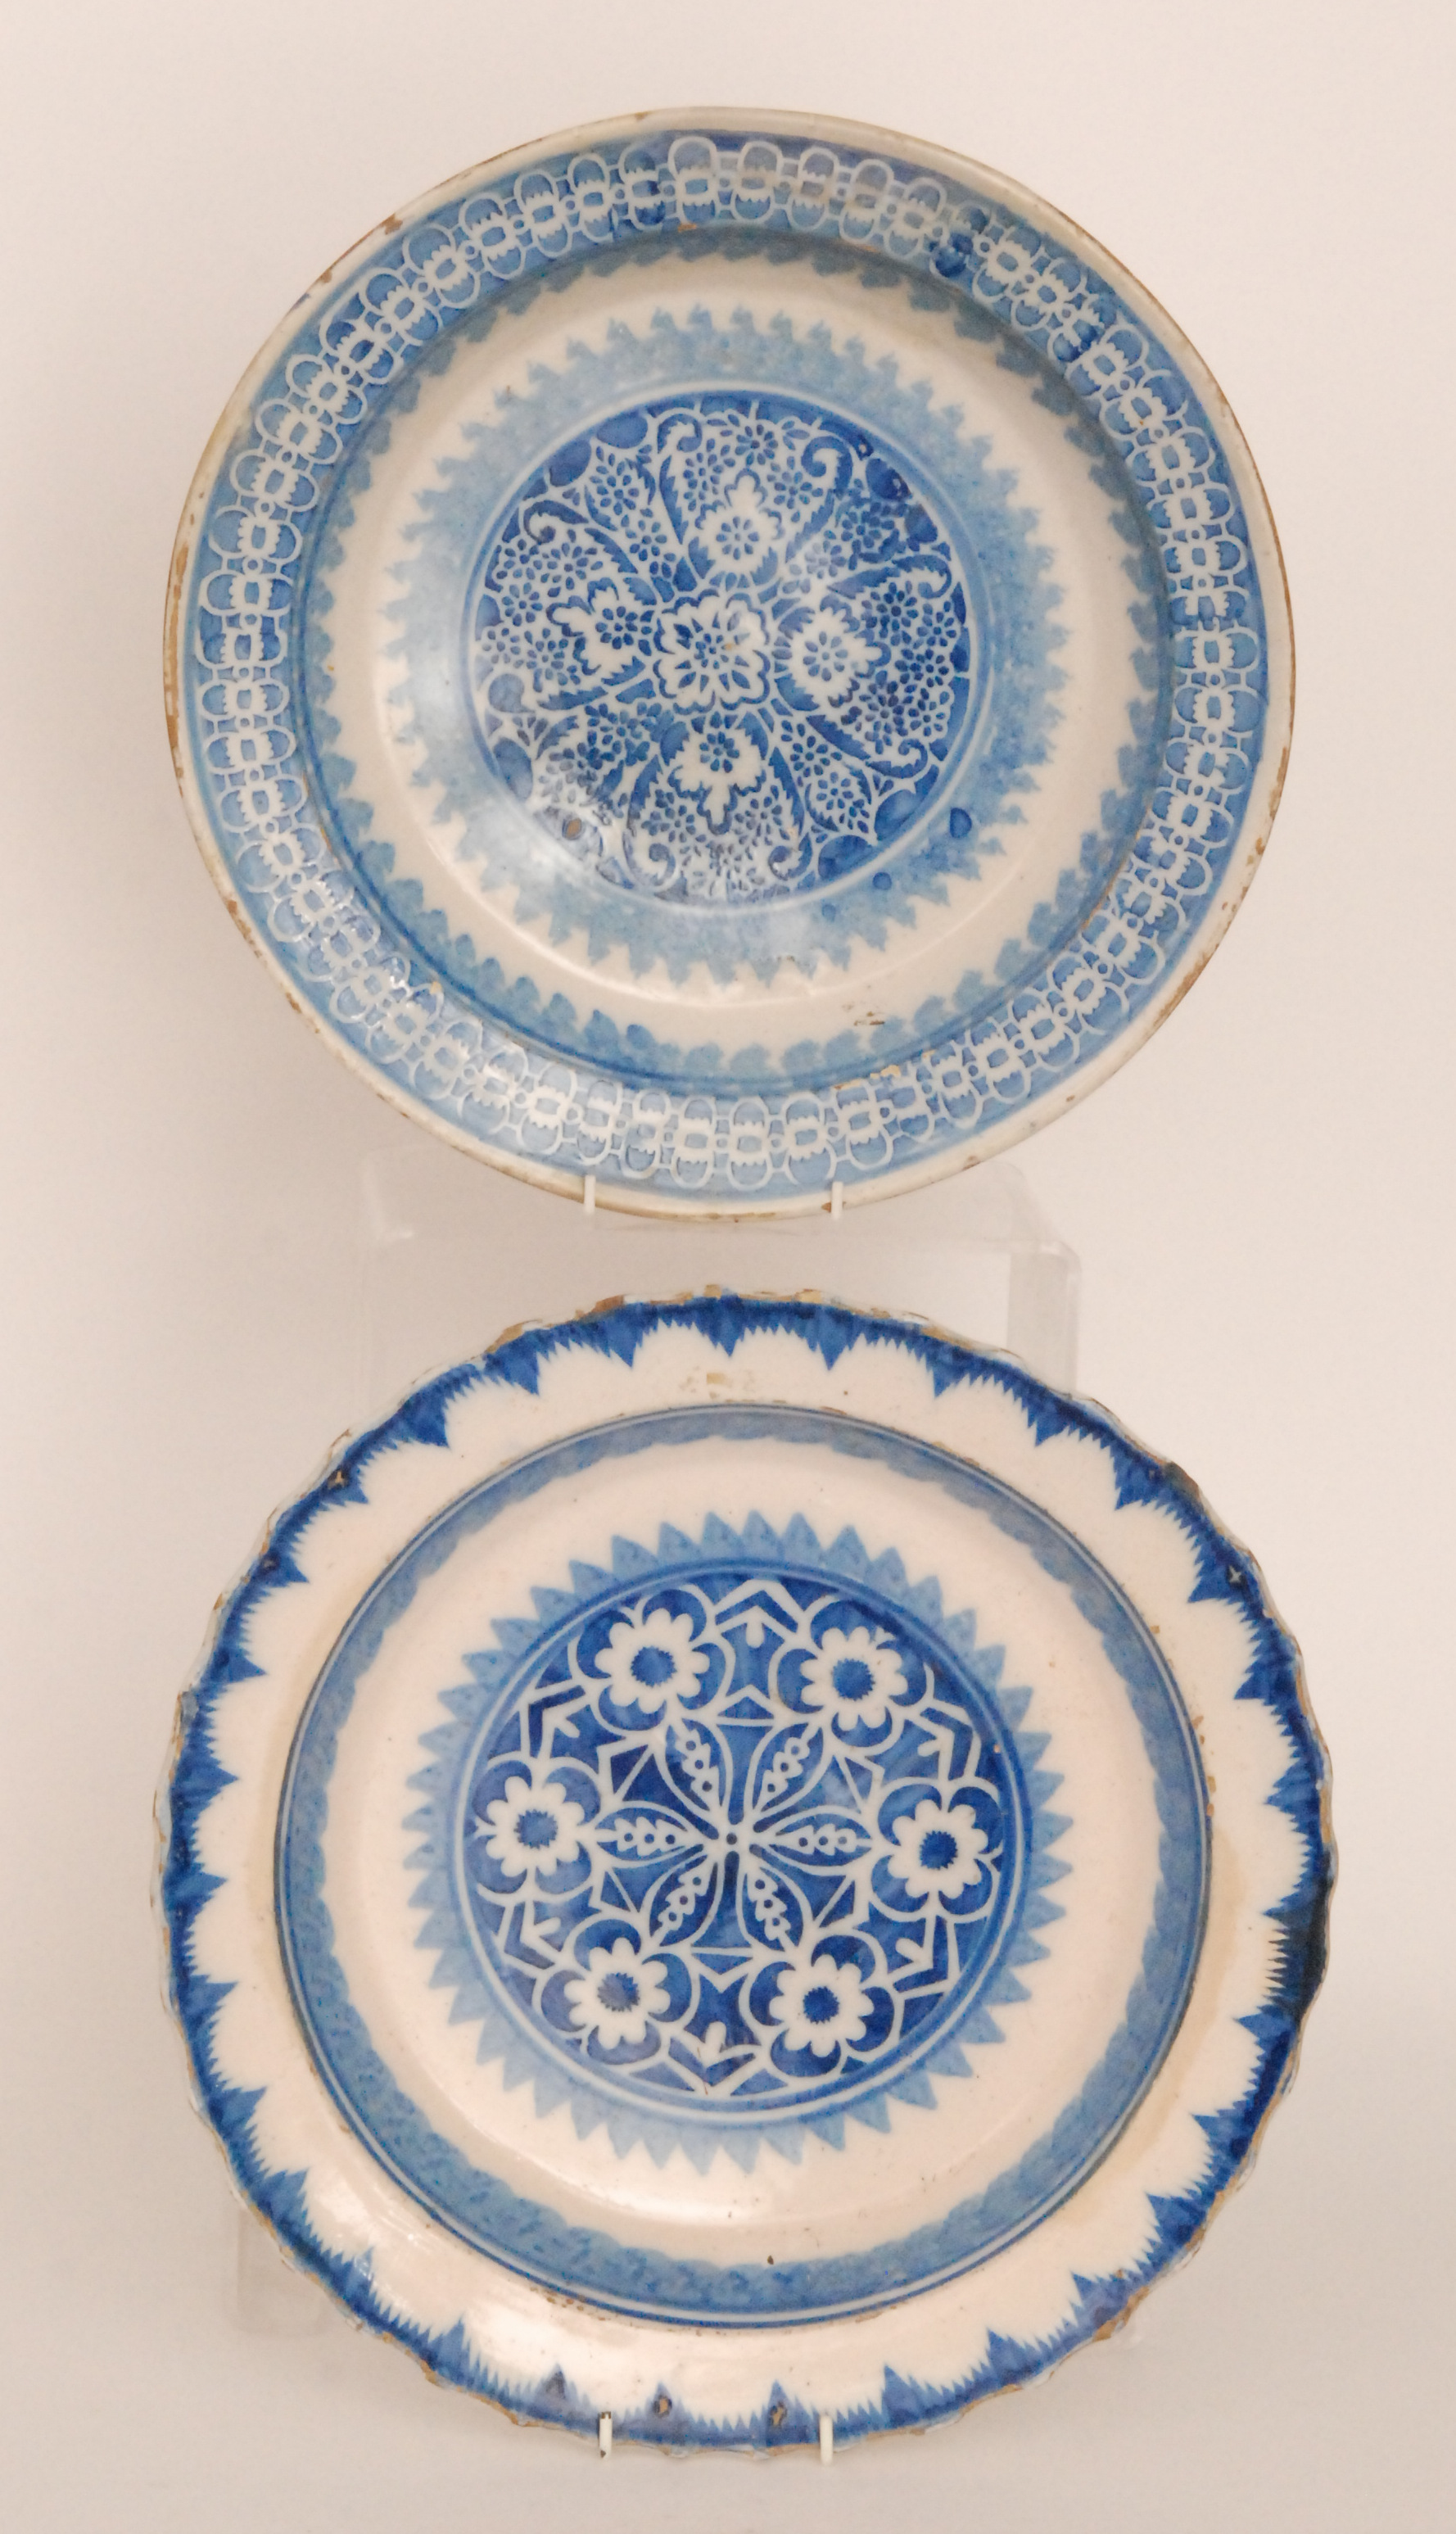 Two late 19th to early 20th Century continental tin glazed chargers both decorated in blue and